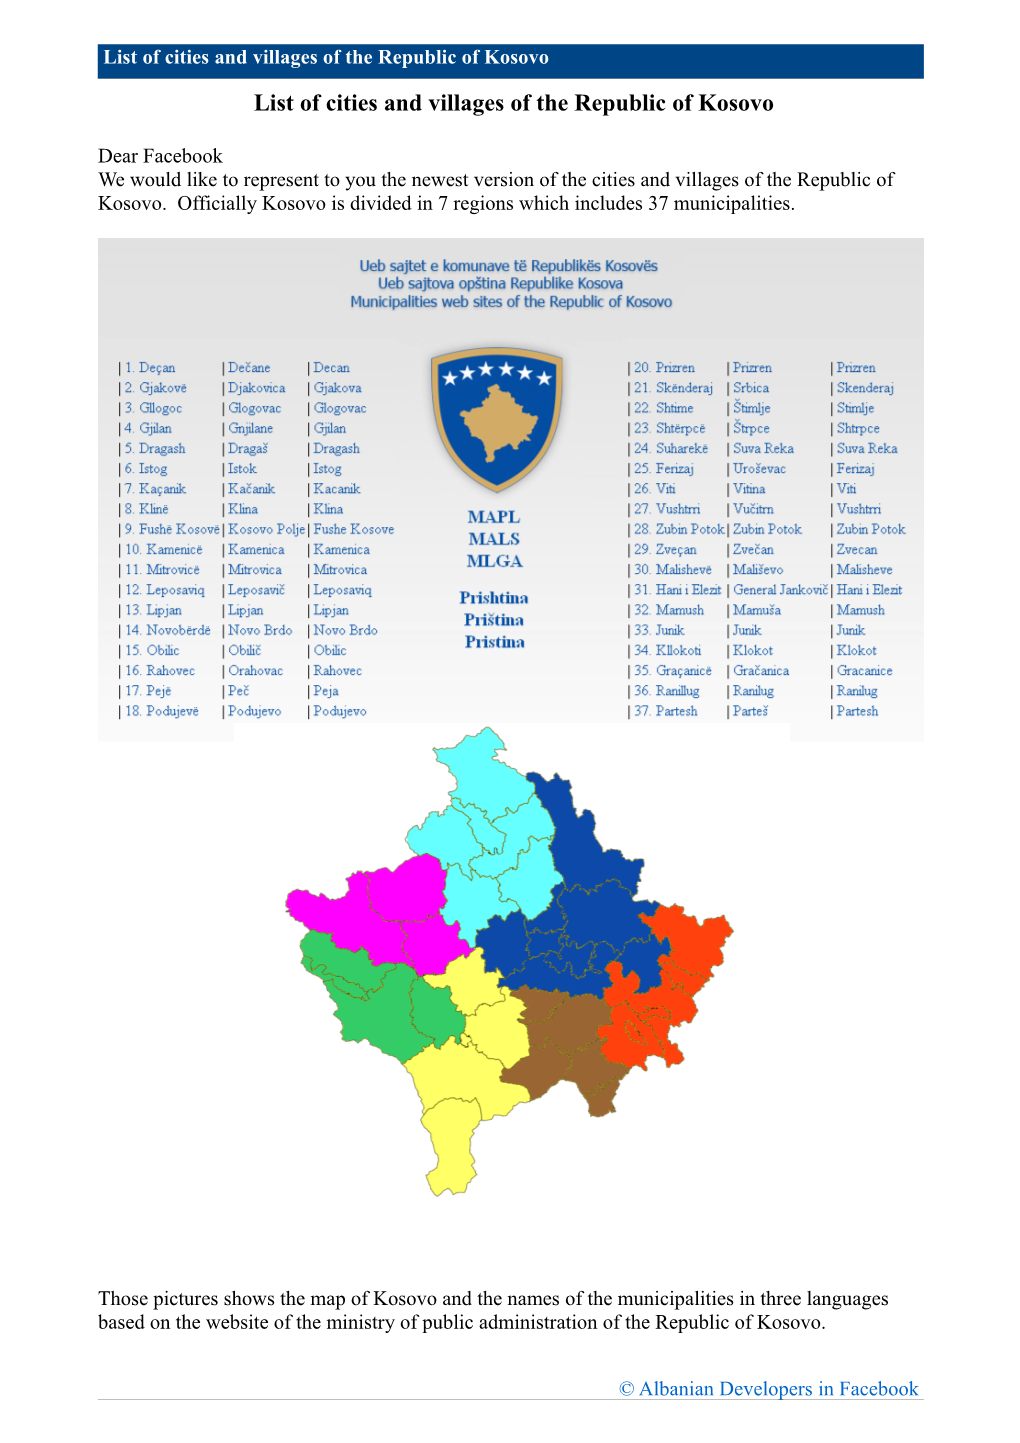 List of Cities and Villages of the Republic of Kosovo List of Cities and Villages of the Republic of Kosovo